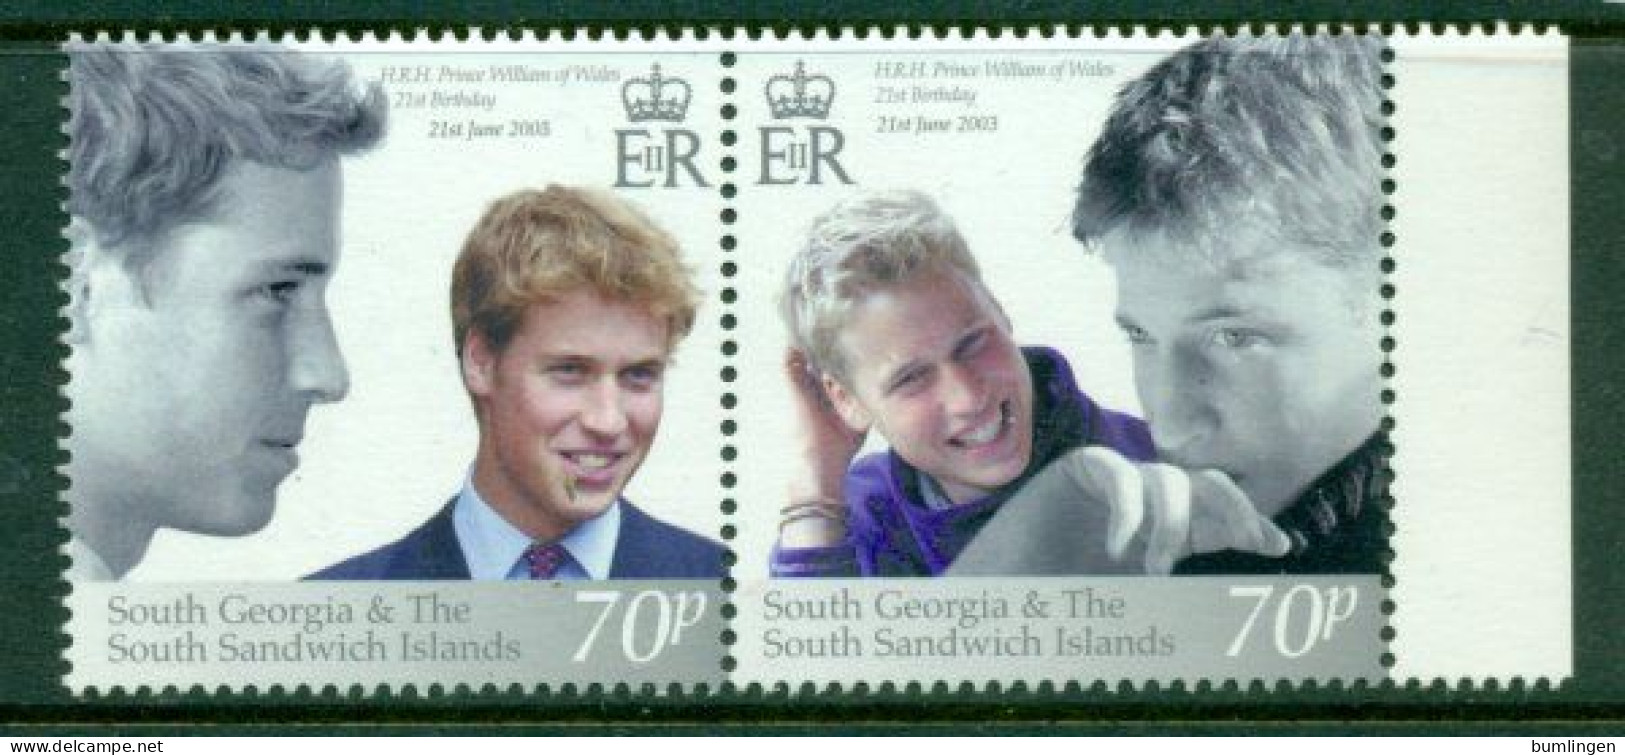 SOUTH GEORGIA & THE SOUTH SANDWICH ISLANDS 2003 Mi 362-63 Pair** 21st Anniversary Of Prince William [B703] - Familles Royales